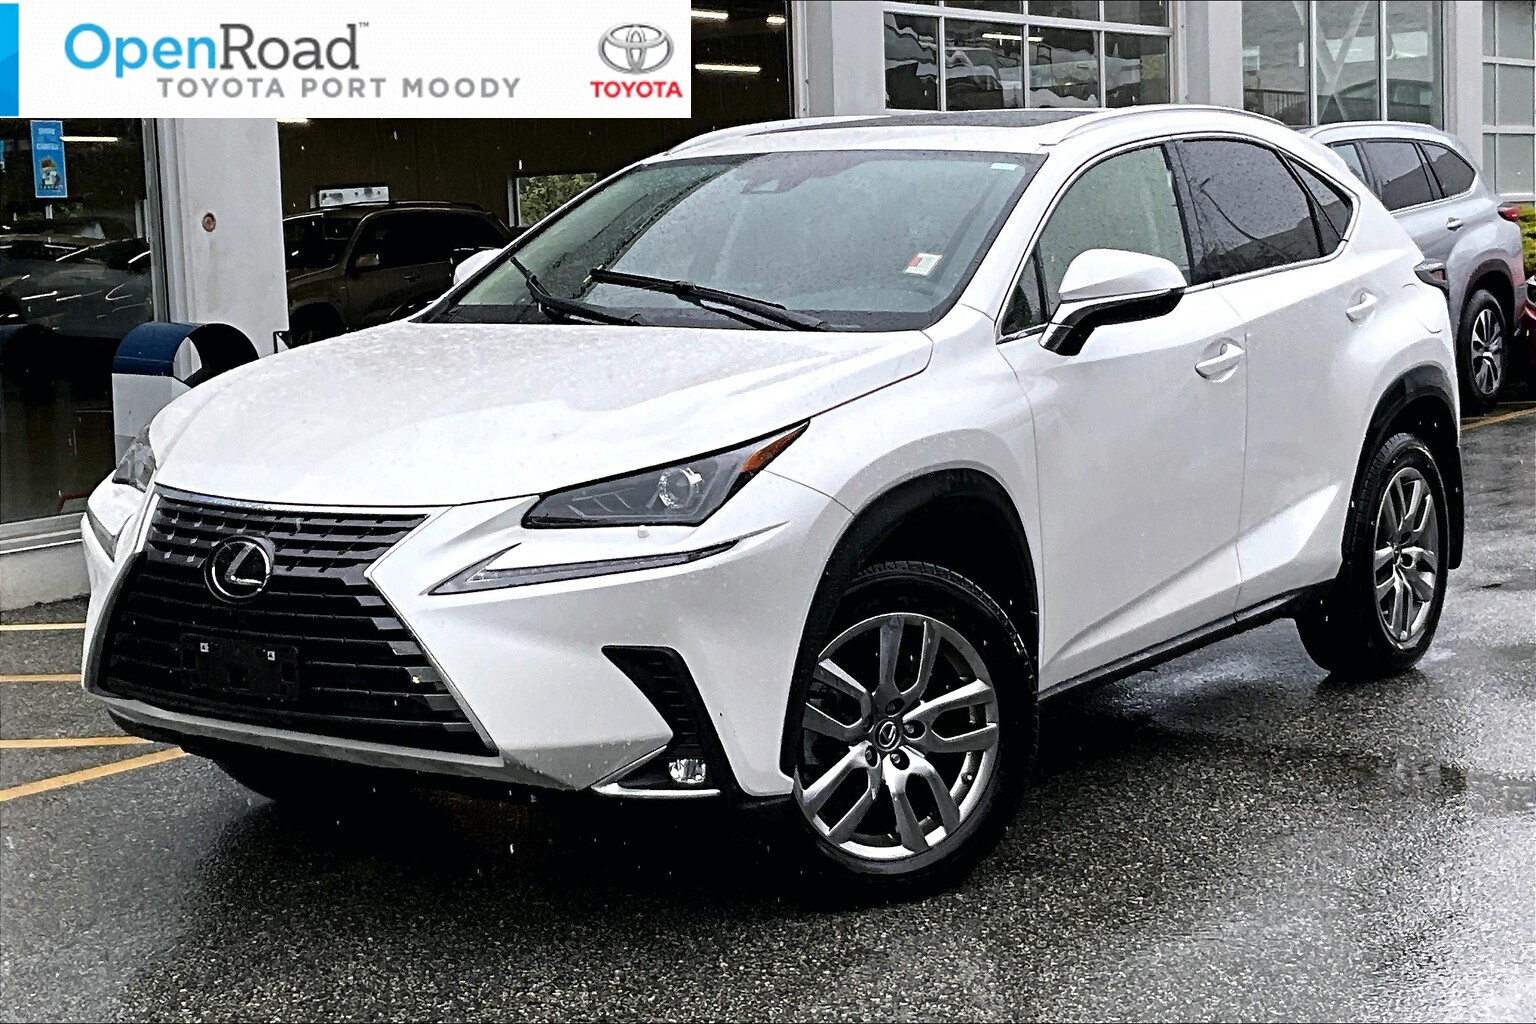 2021 Lexus NX 300 AWD |OpenRoad True Price |Local |One Owner |No